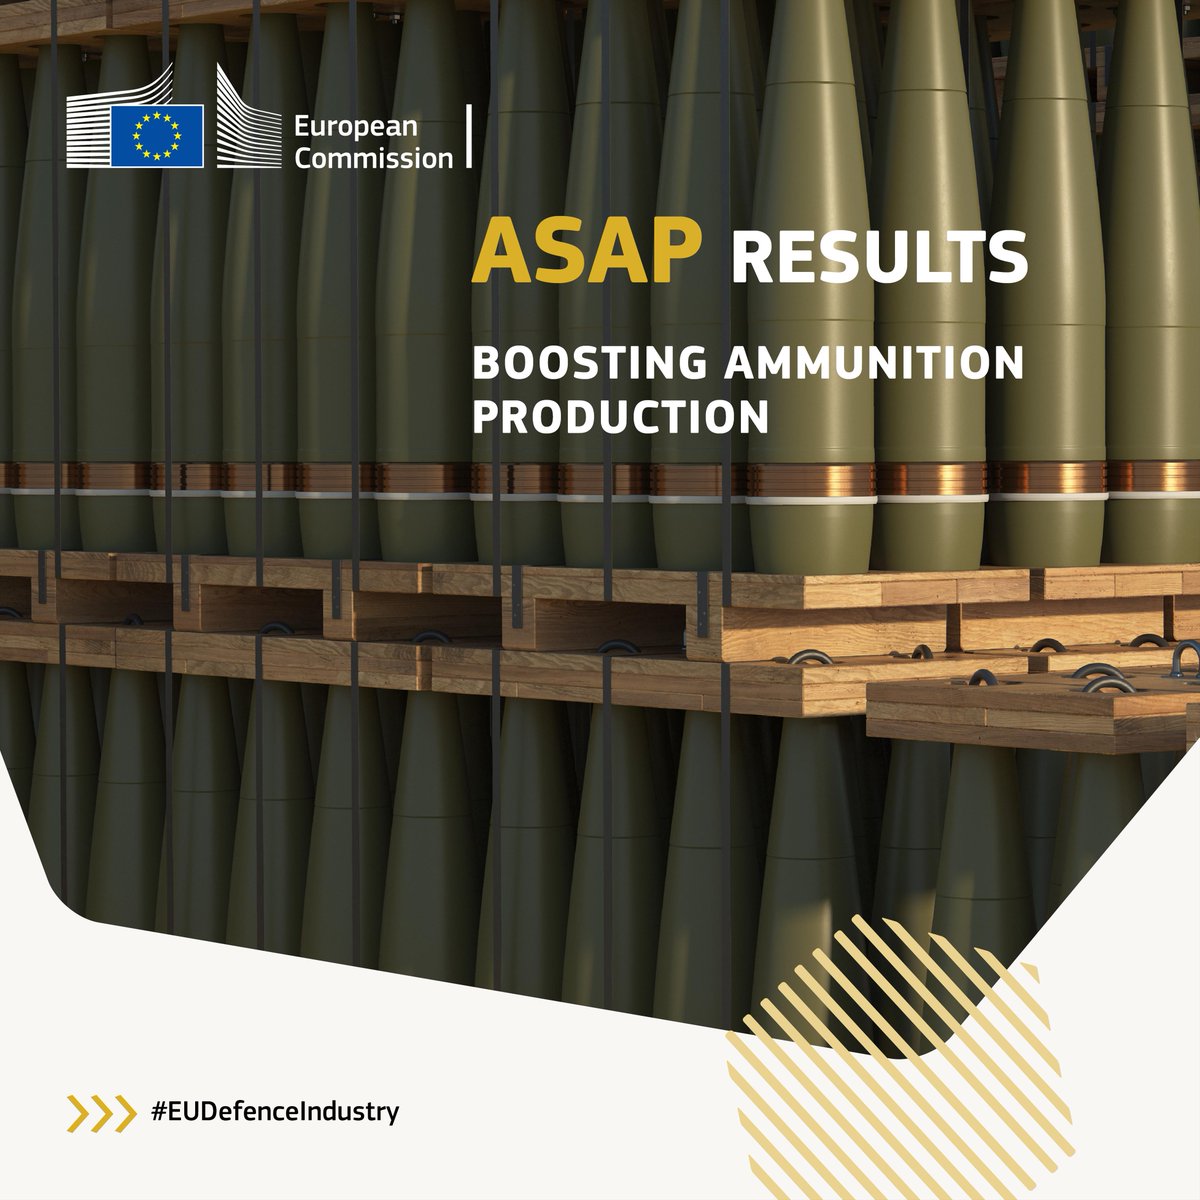 To strengthen the readiness of the #EUDefenceIndustry 🛡️🇪🇺, we have selected a project under the #ASAP Call for Proposals to facilitate

➡️Testing and reconditioning certification for artillery ammunition in storage, with a total budget of ~ €2 million